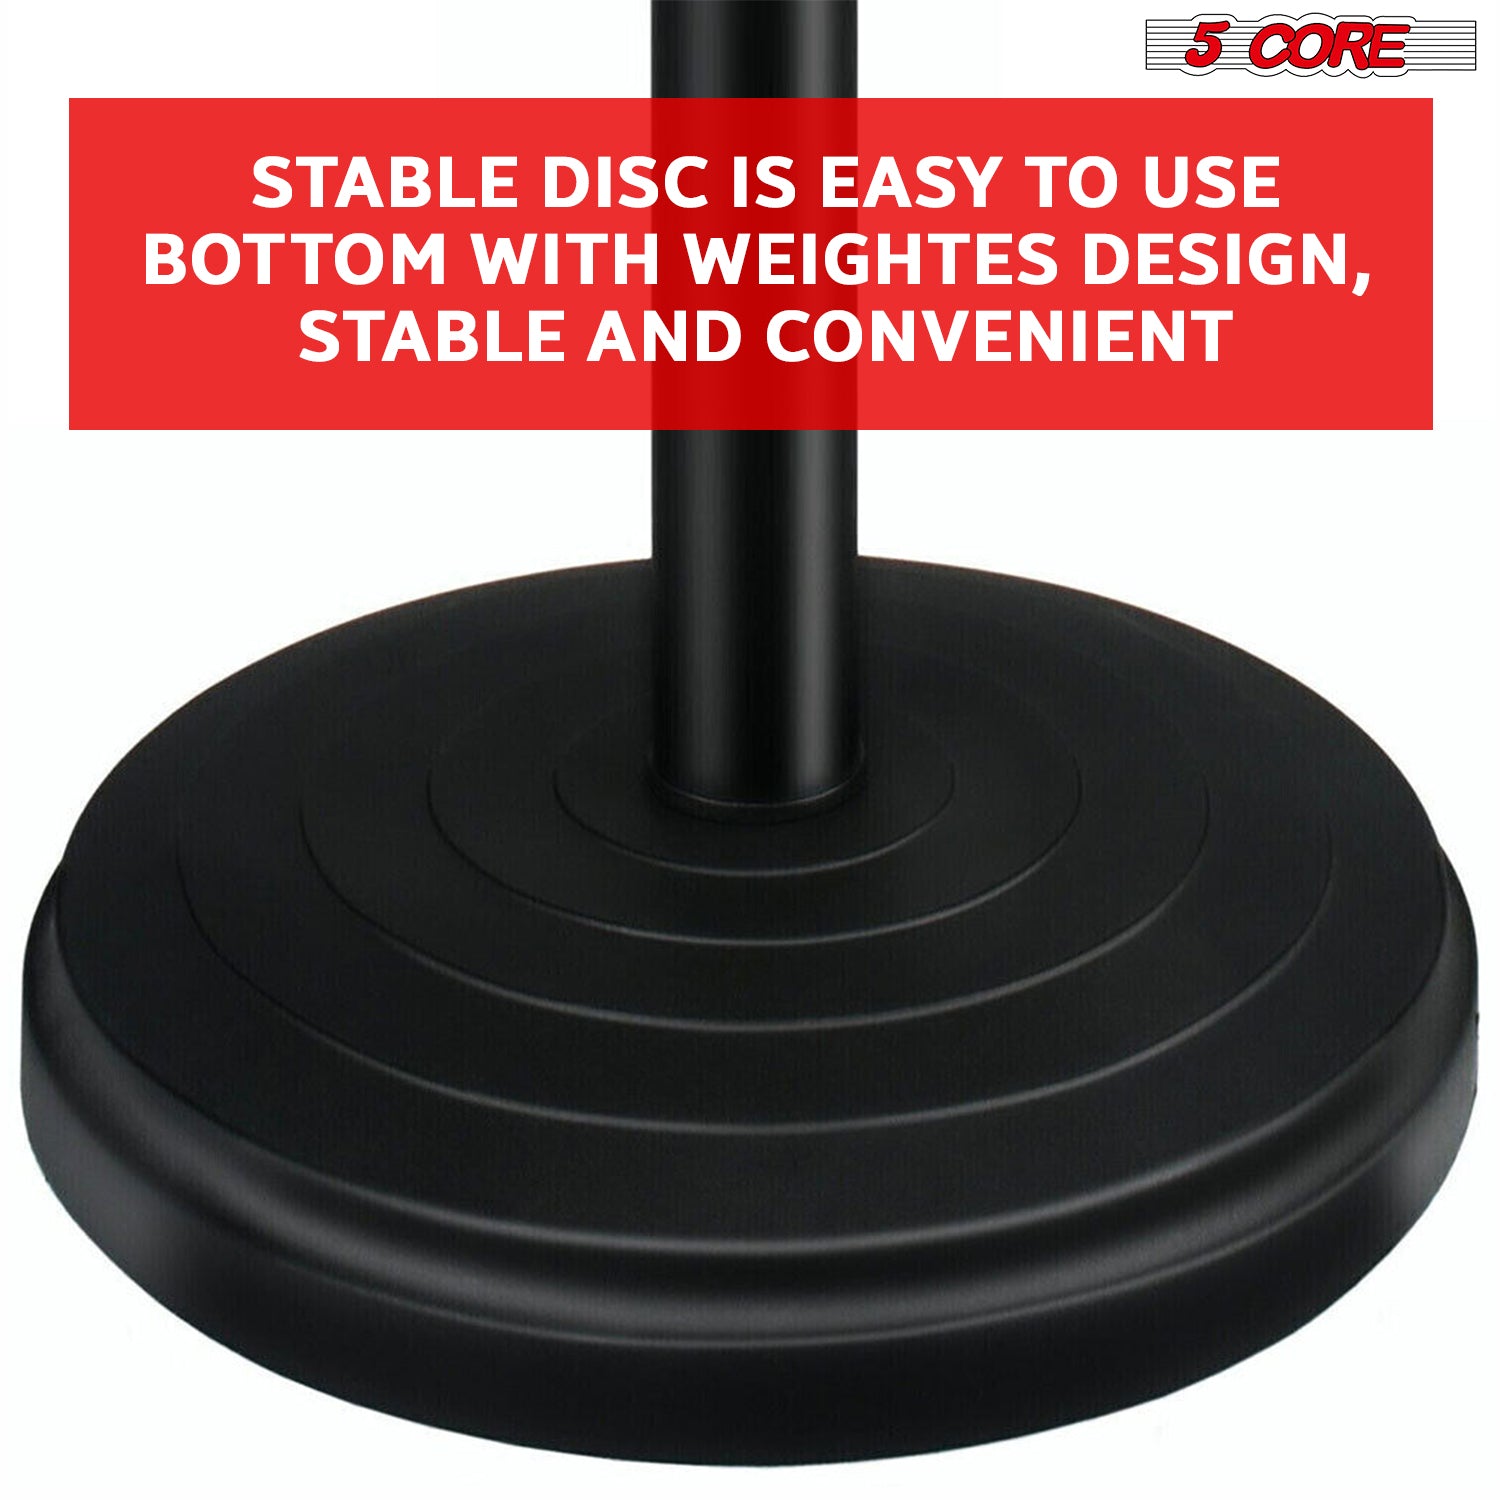 Round base microphone holder: Ensures stability during recording sessions.